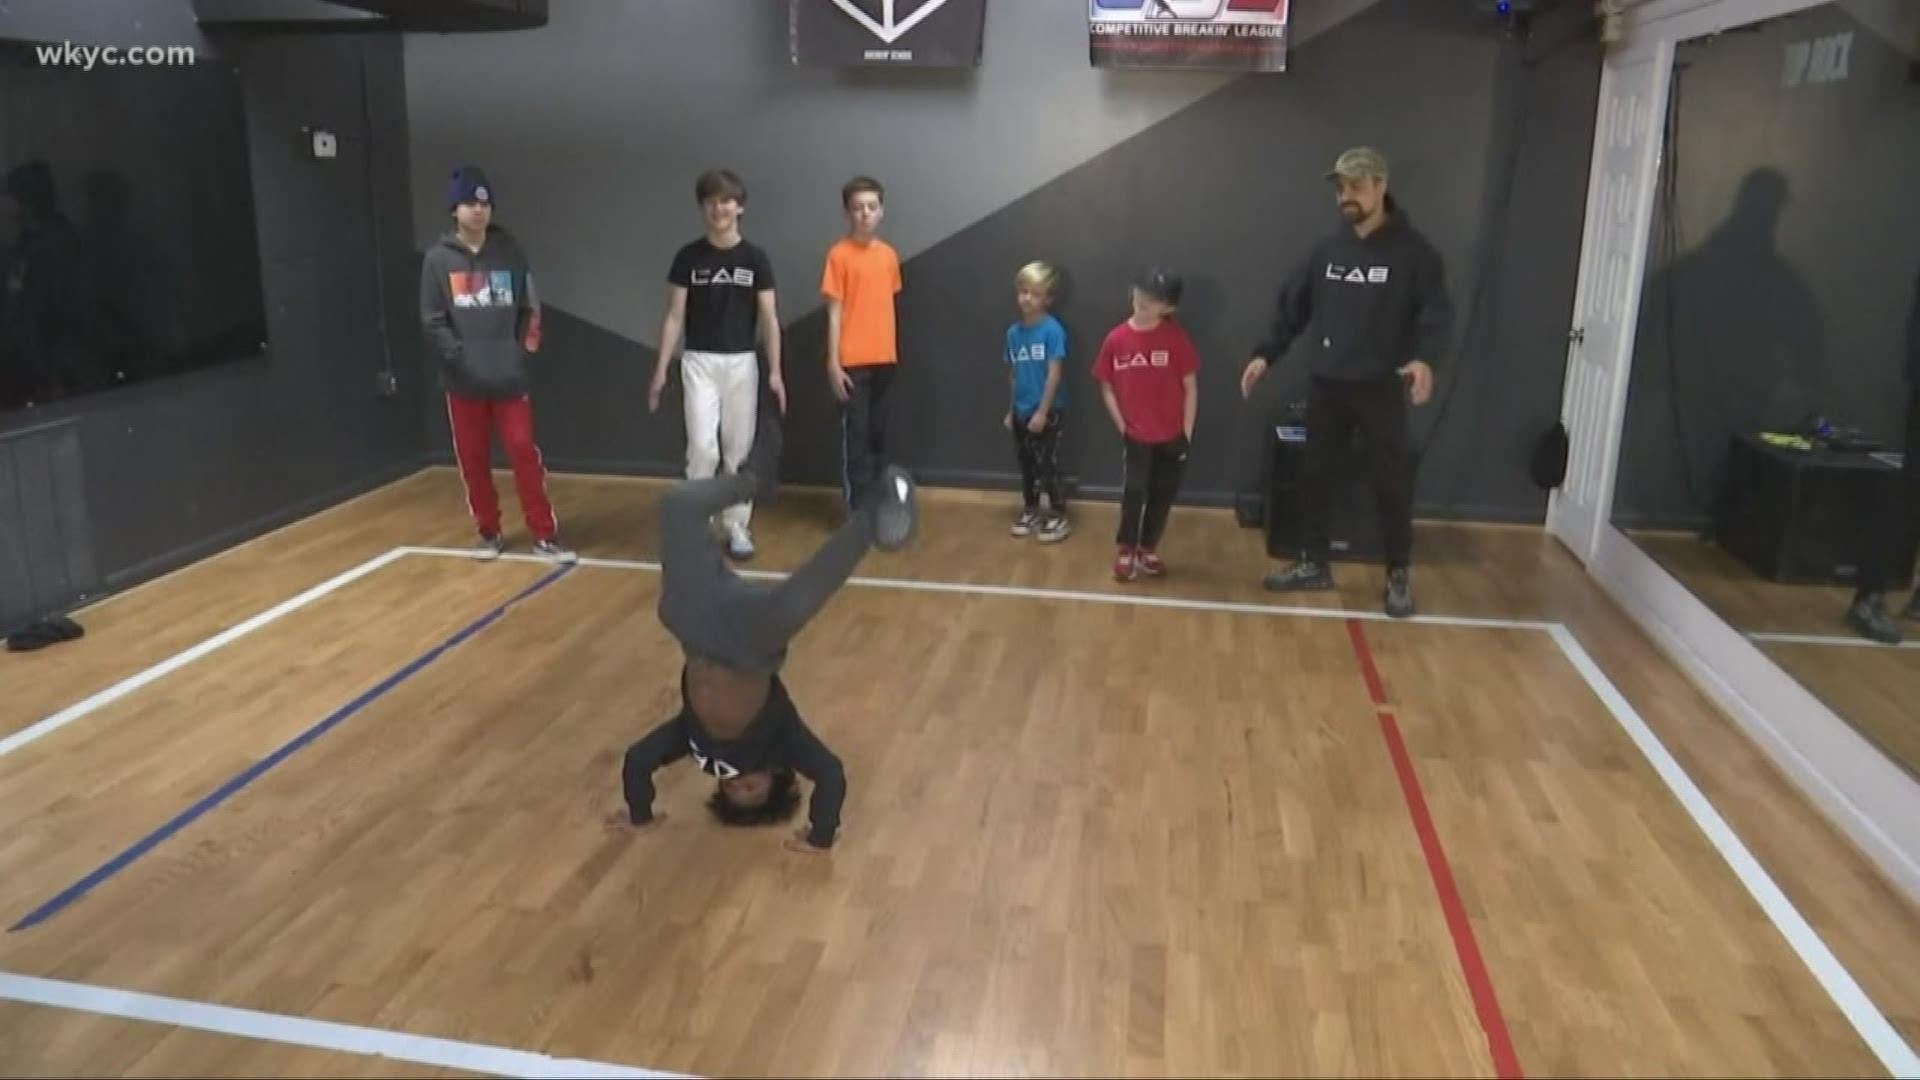 Break-dancing will debut at the Olympics in 2024. A Maryland man is charged with forming the first Team USA.